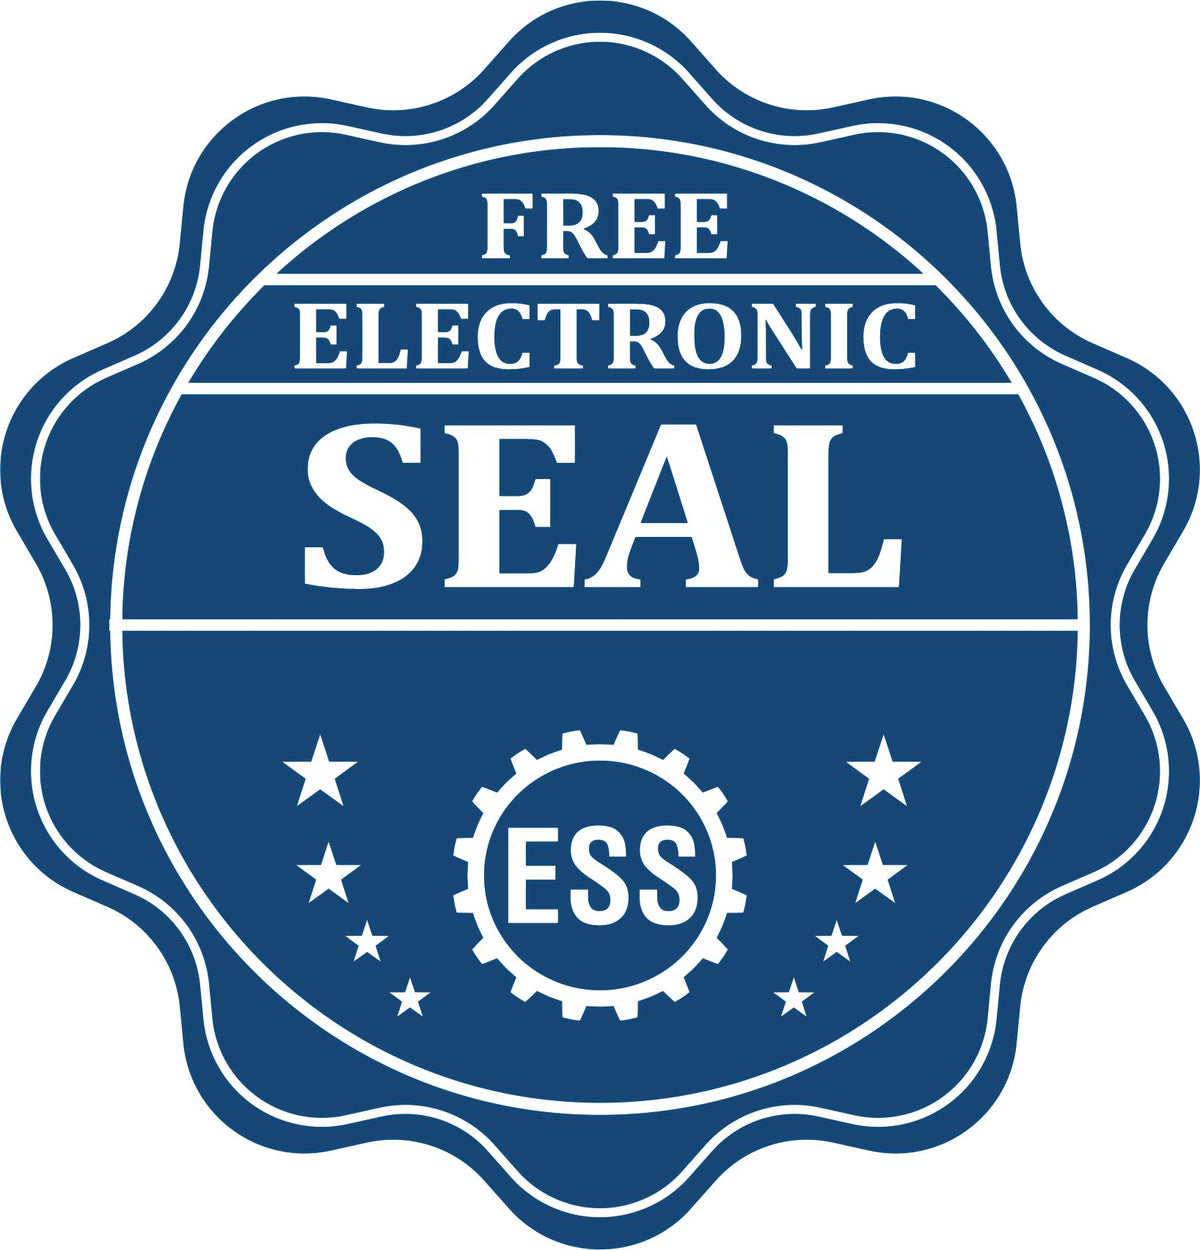 A badge showing a free electronic seal for the Hybrid Missouri Land Surveyor Seal with stars and the ESS gear on the emblem.